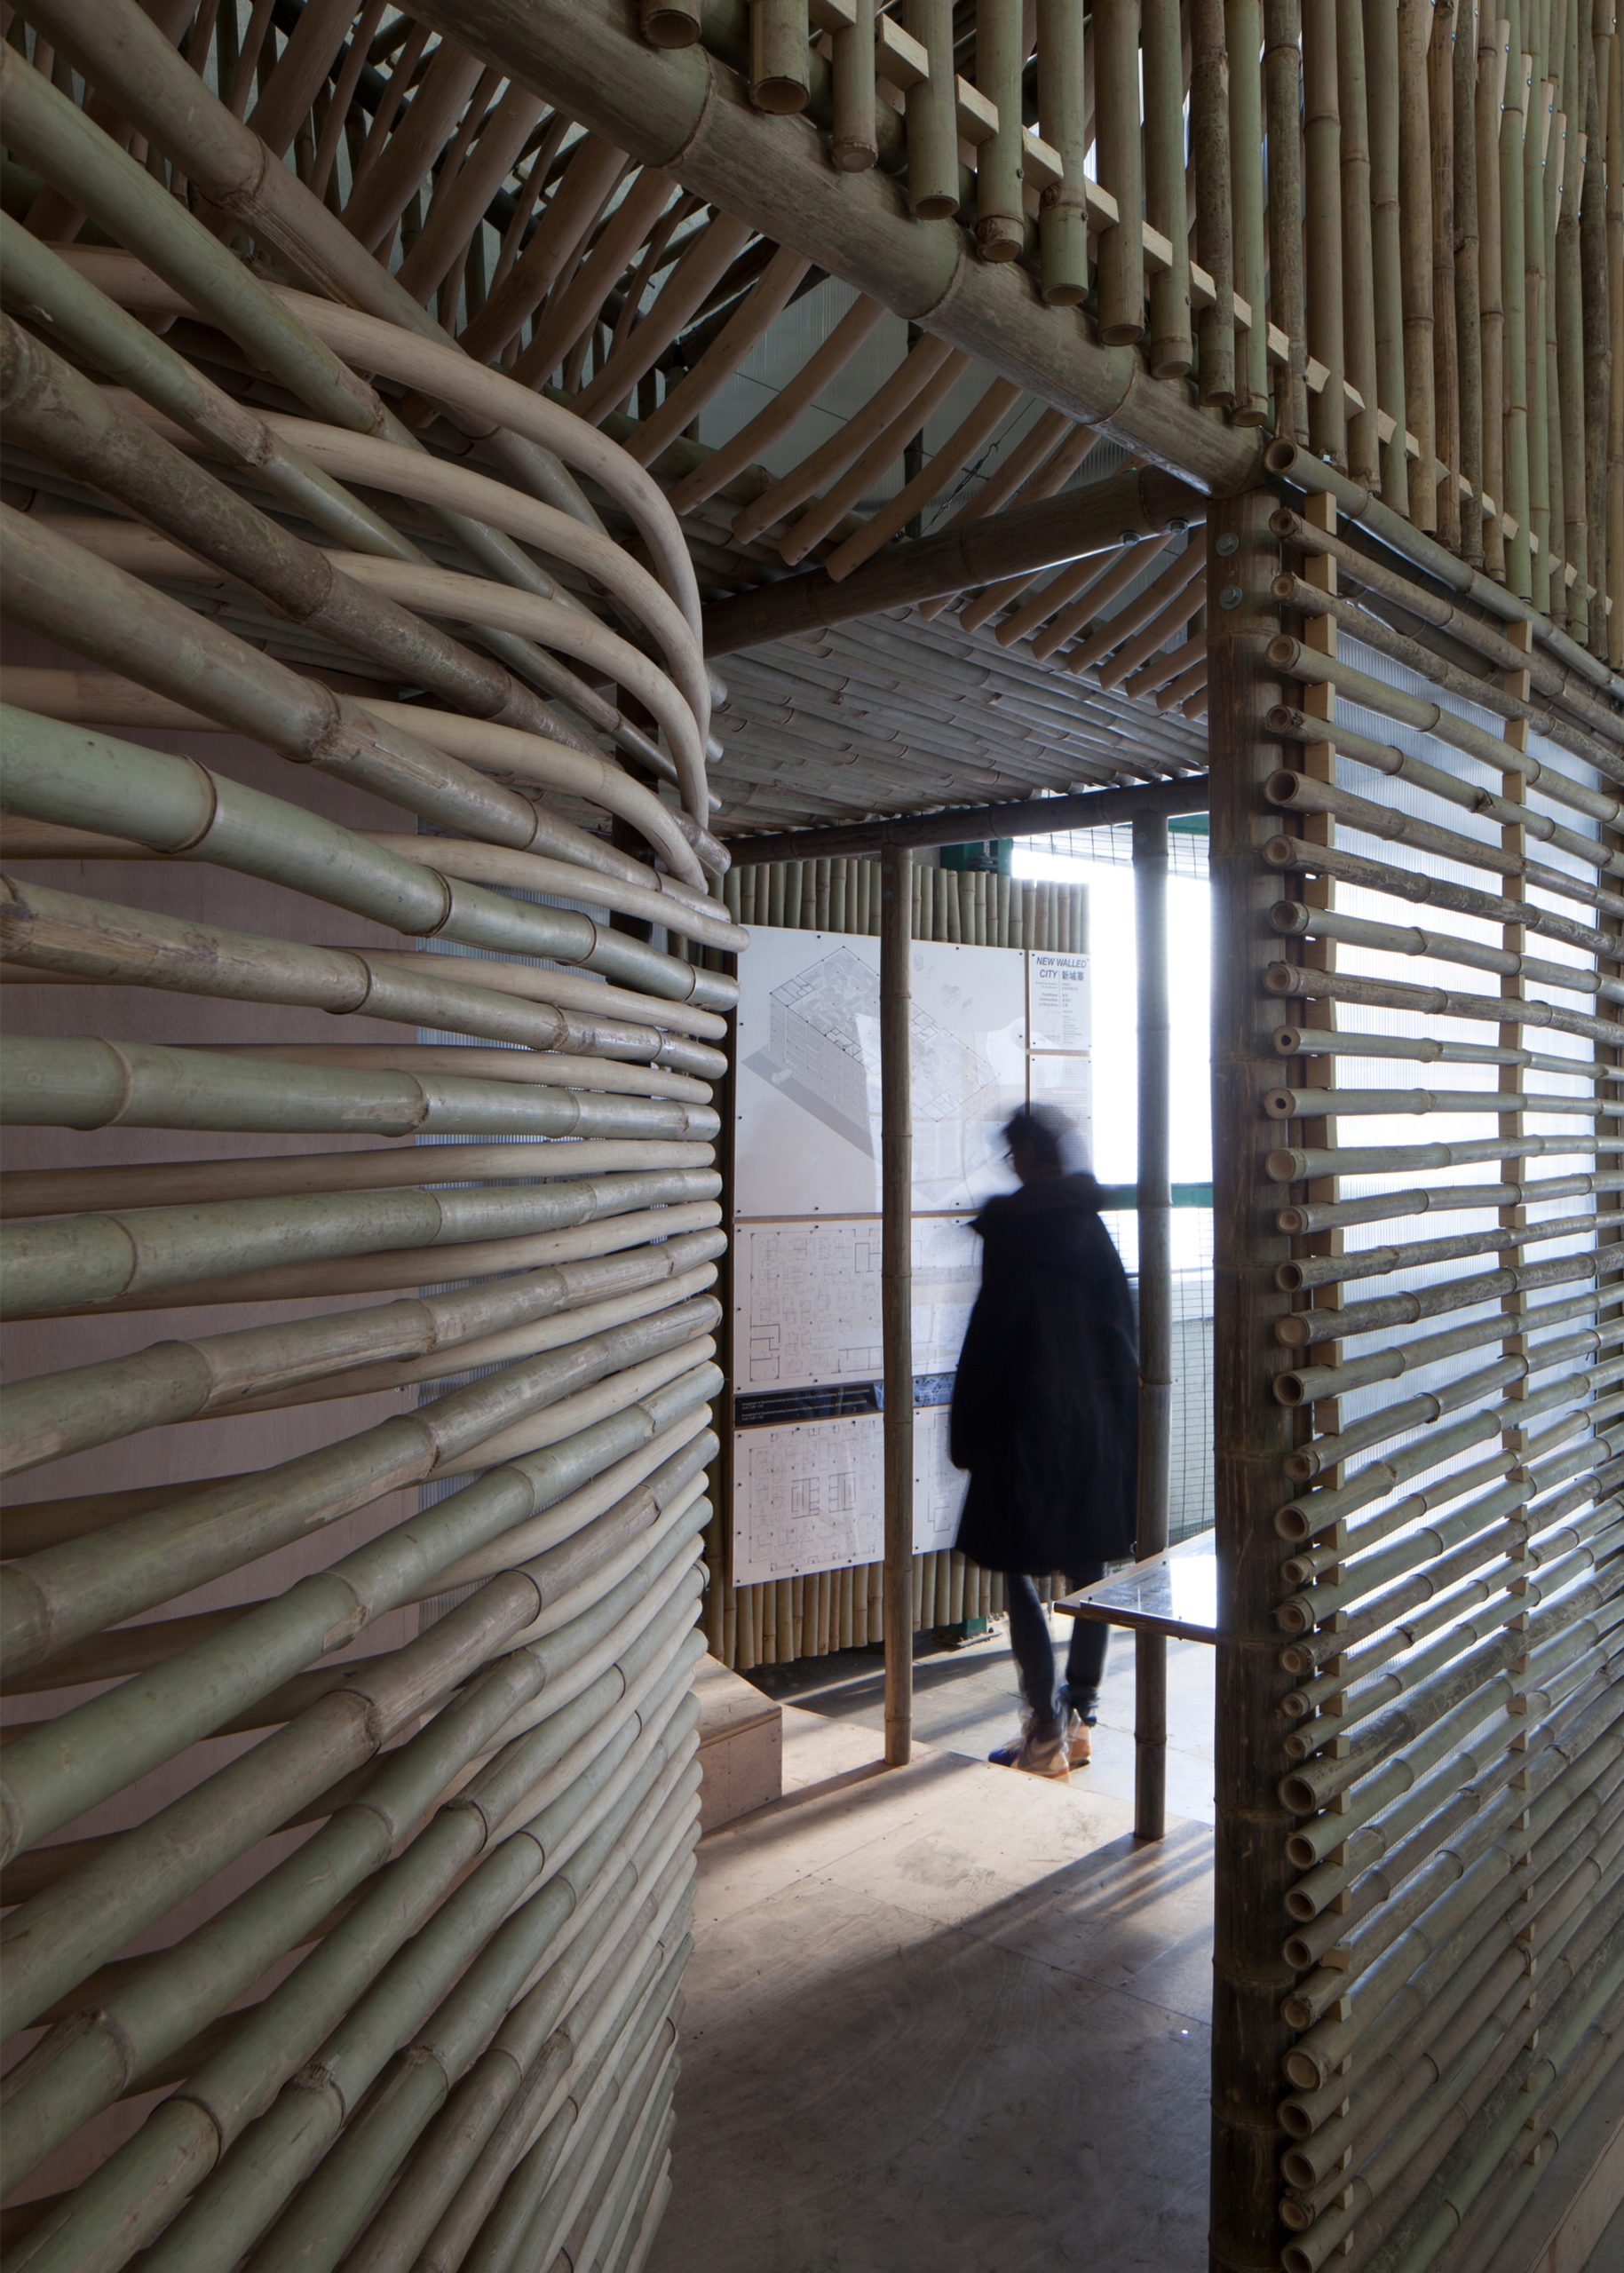 These Bamboo Micro-Homes Would Turn Abandoned Buildings Into Villages